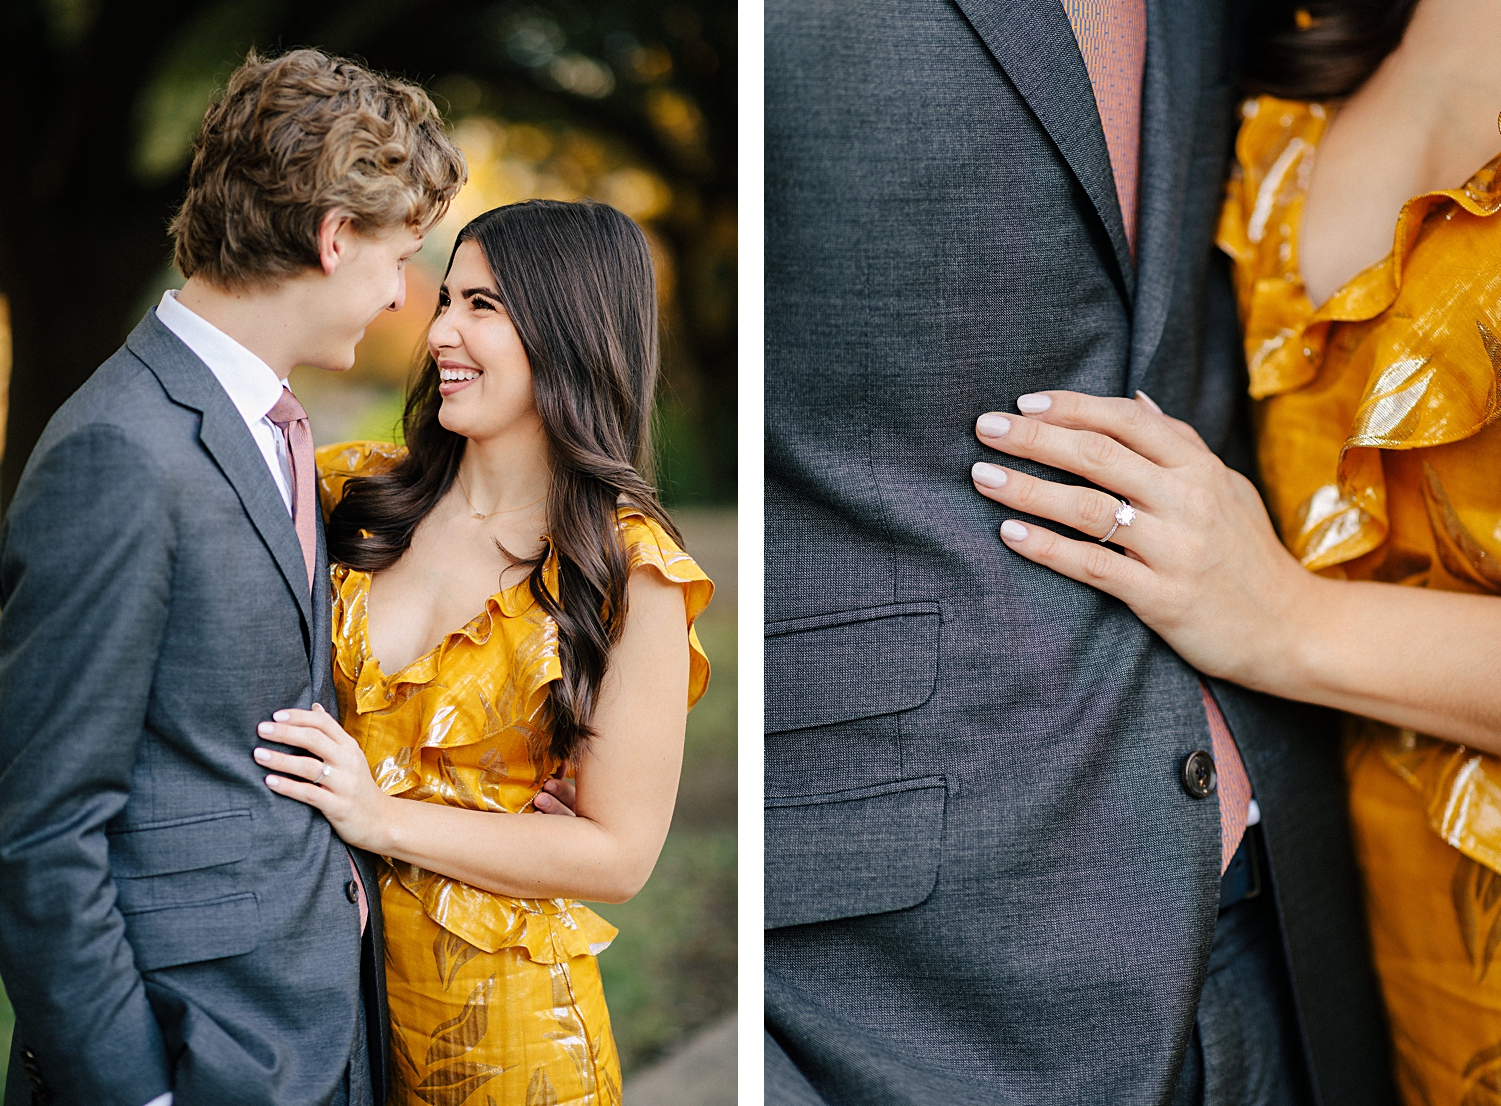 woman in yellow dress smiling with engagement ring hand on man in suit in park